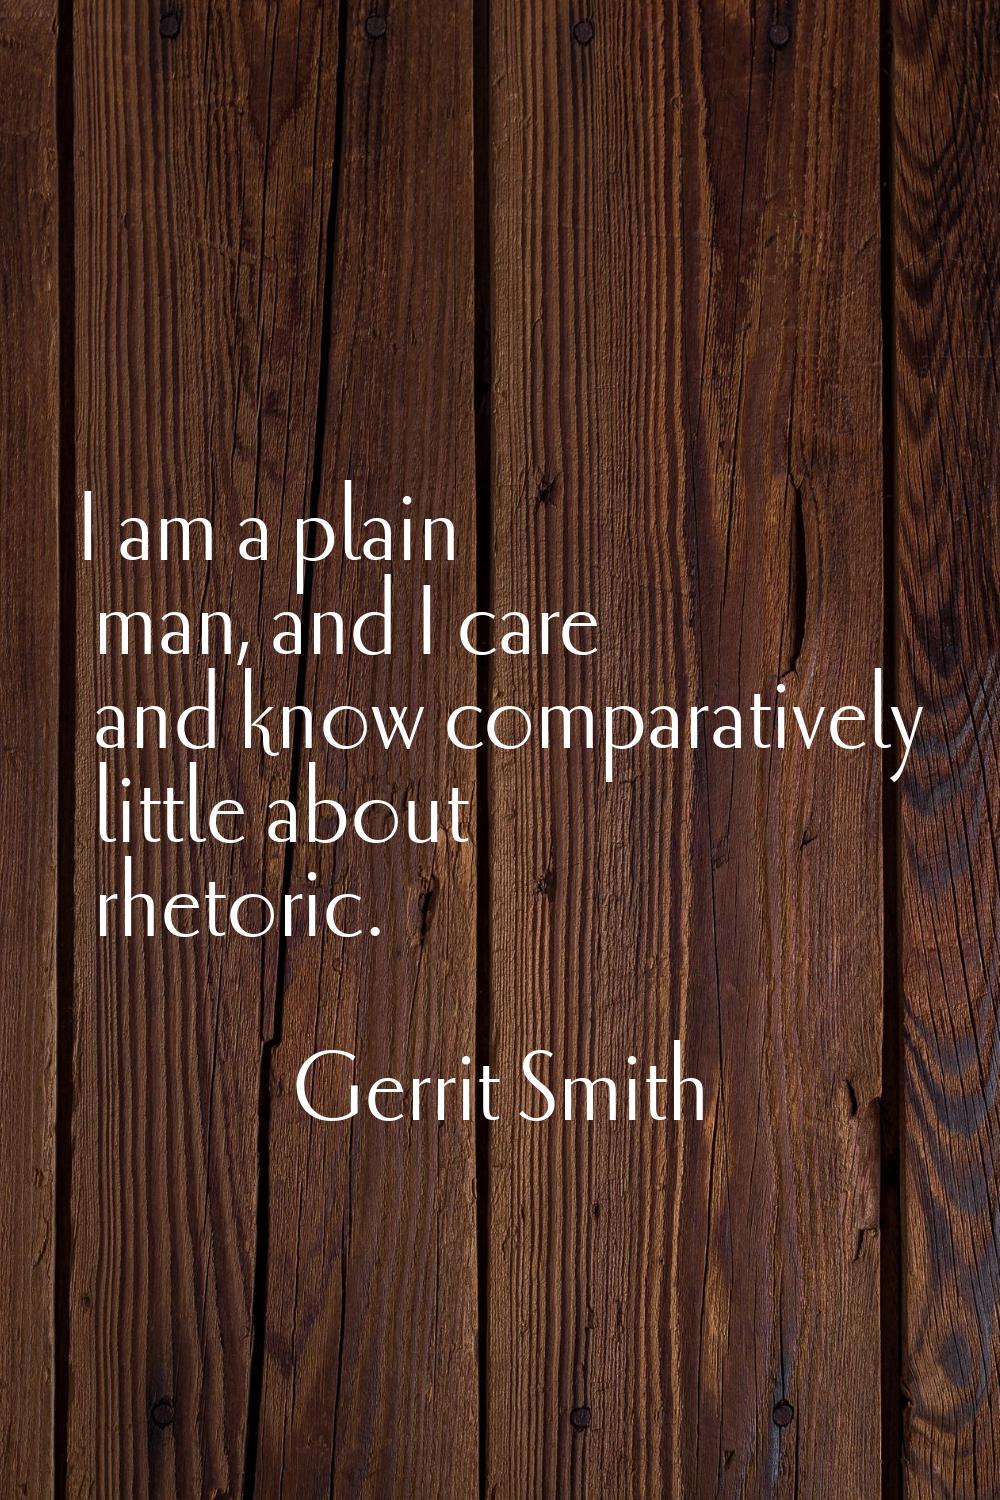 I am a plain man, and I care and know comparatively little about rhetoric.